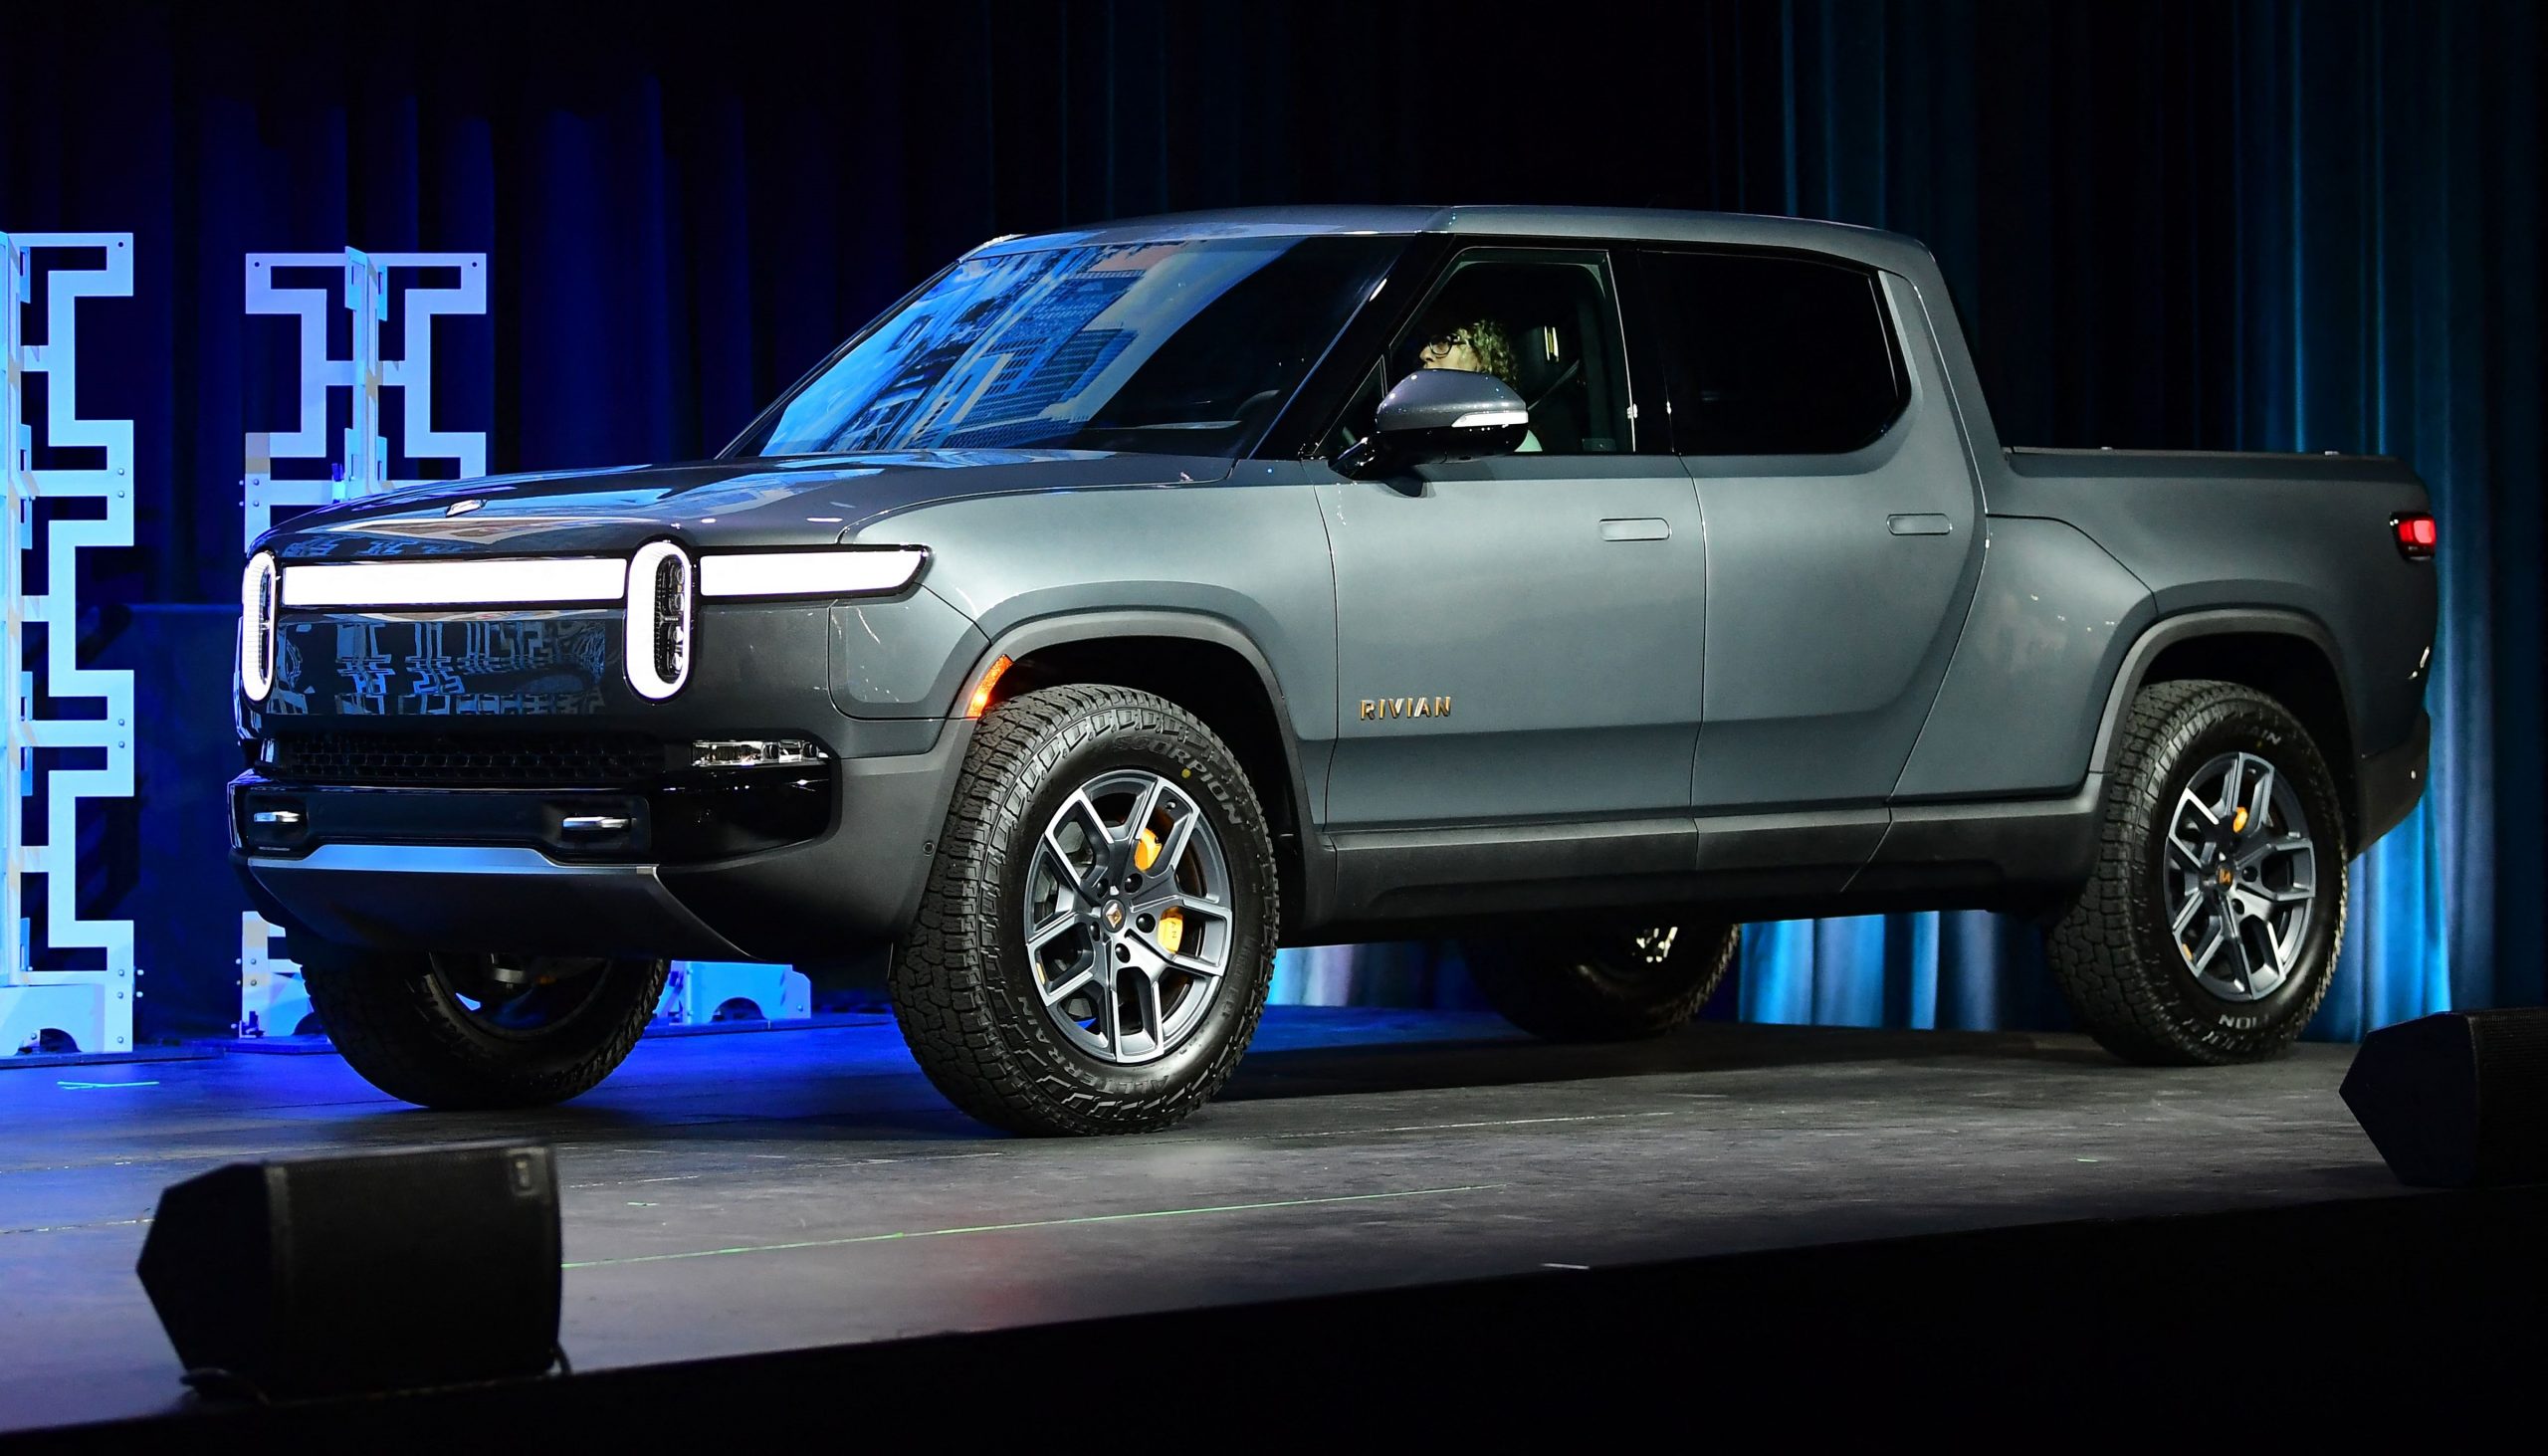 2021 showed us that trucks and SUVs don't need gas engines | DeviceDaily.com